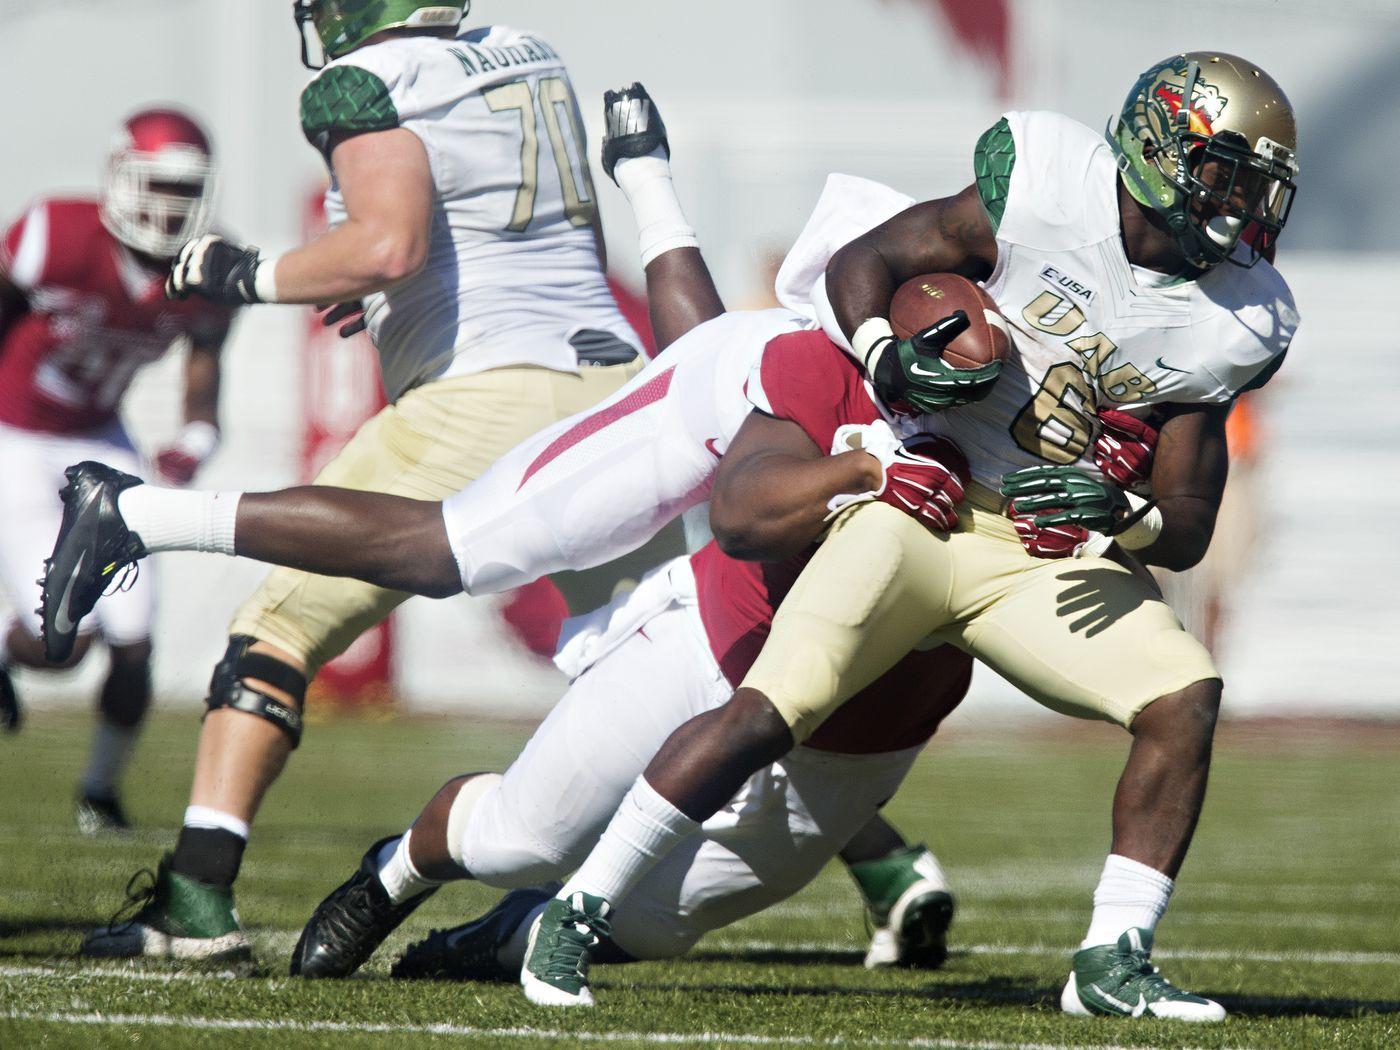 UAB football is back from the dead. Why it went away, explained in a